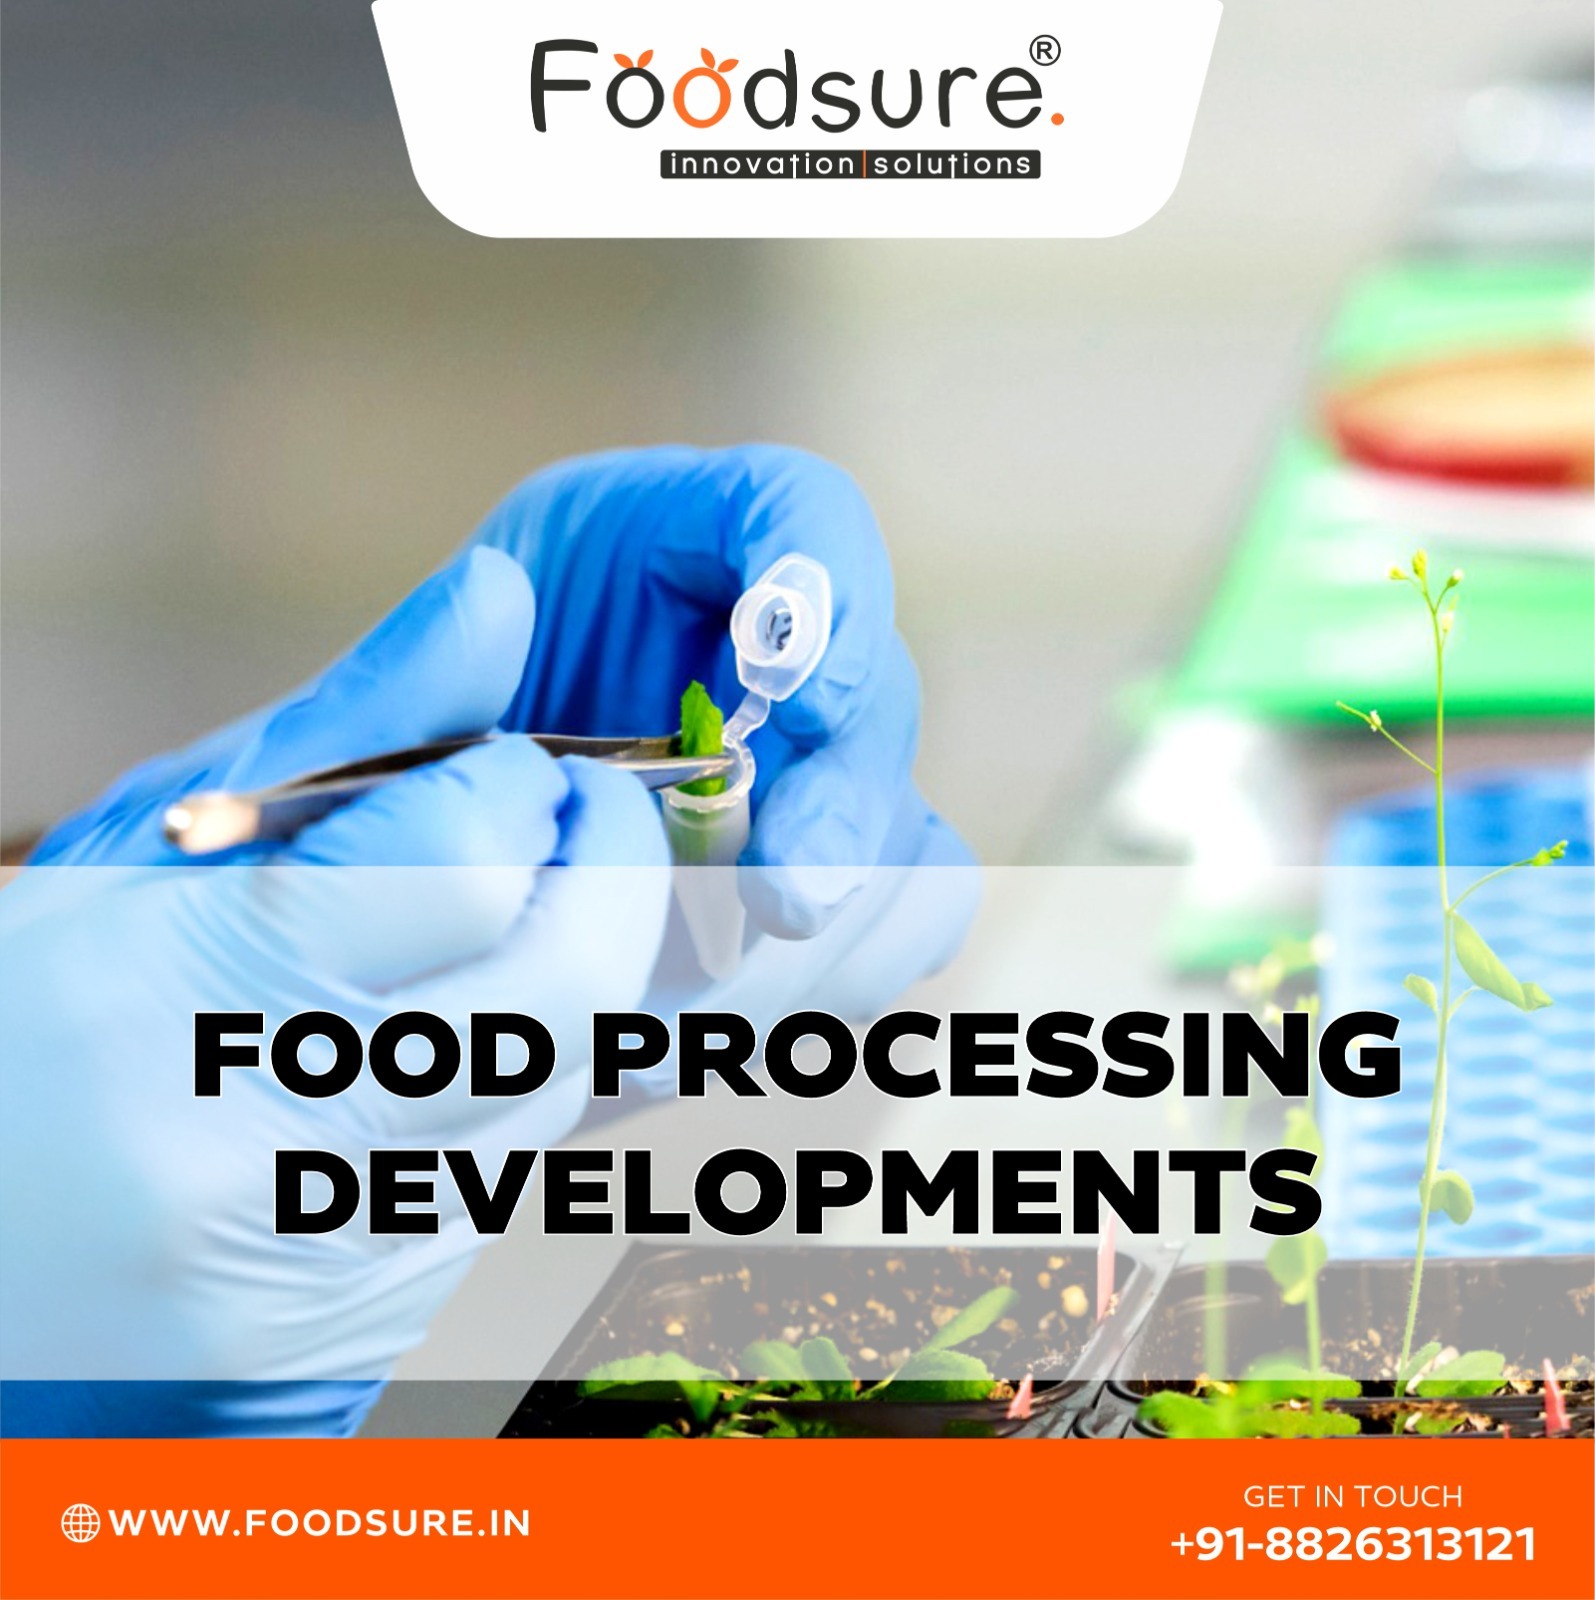 Food Industry Consultant